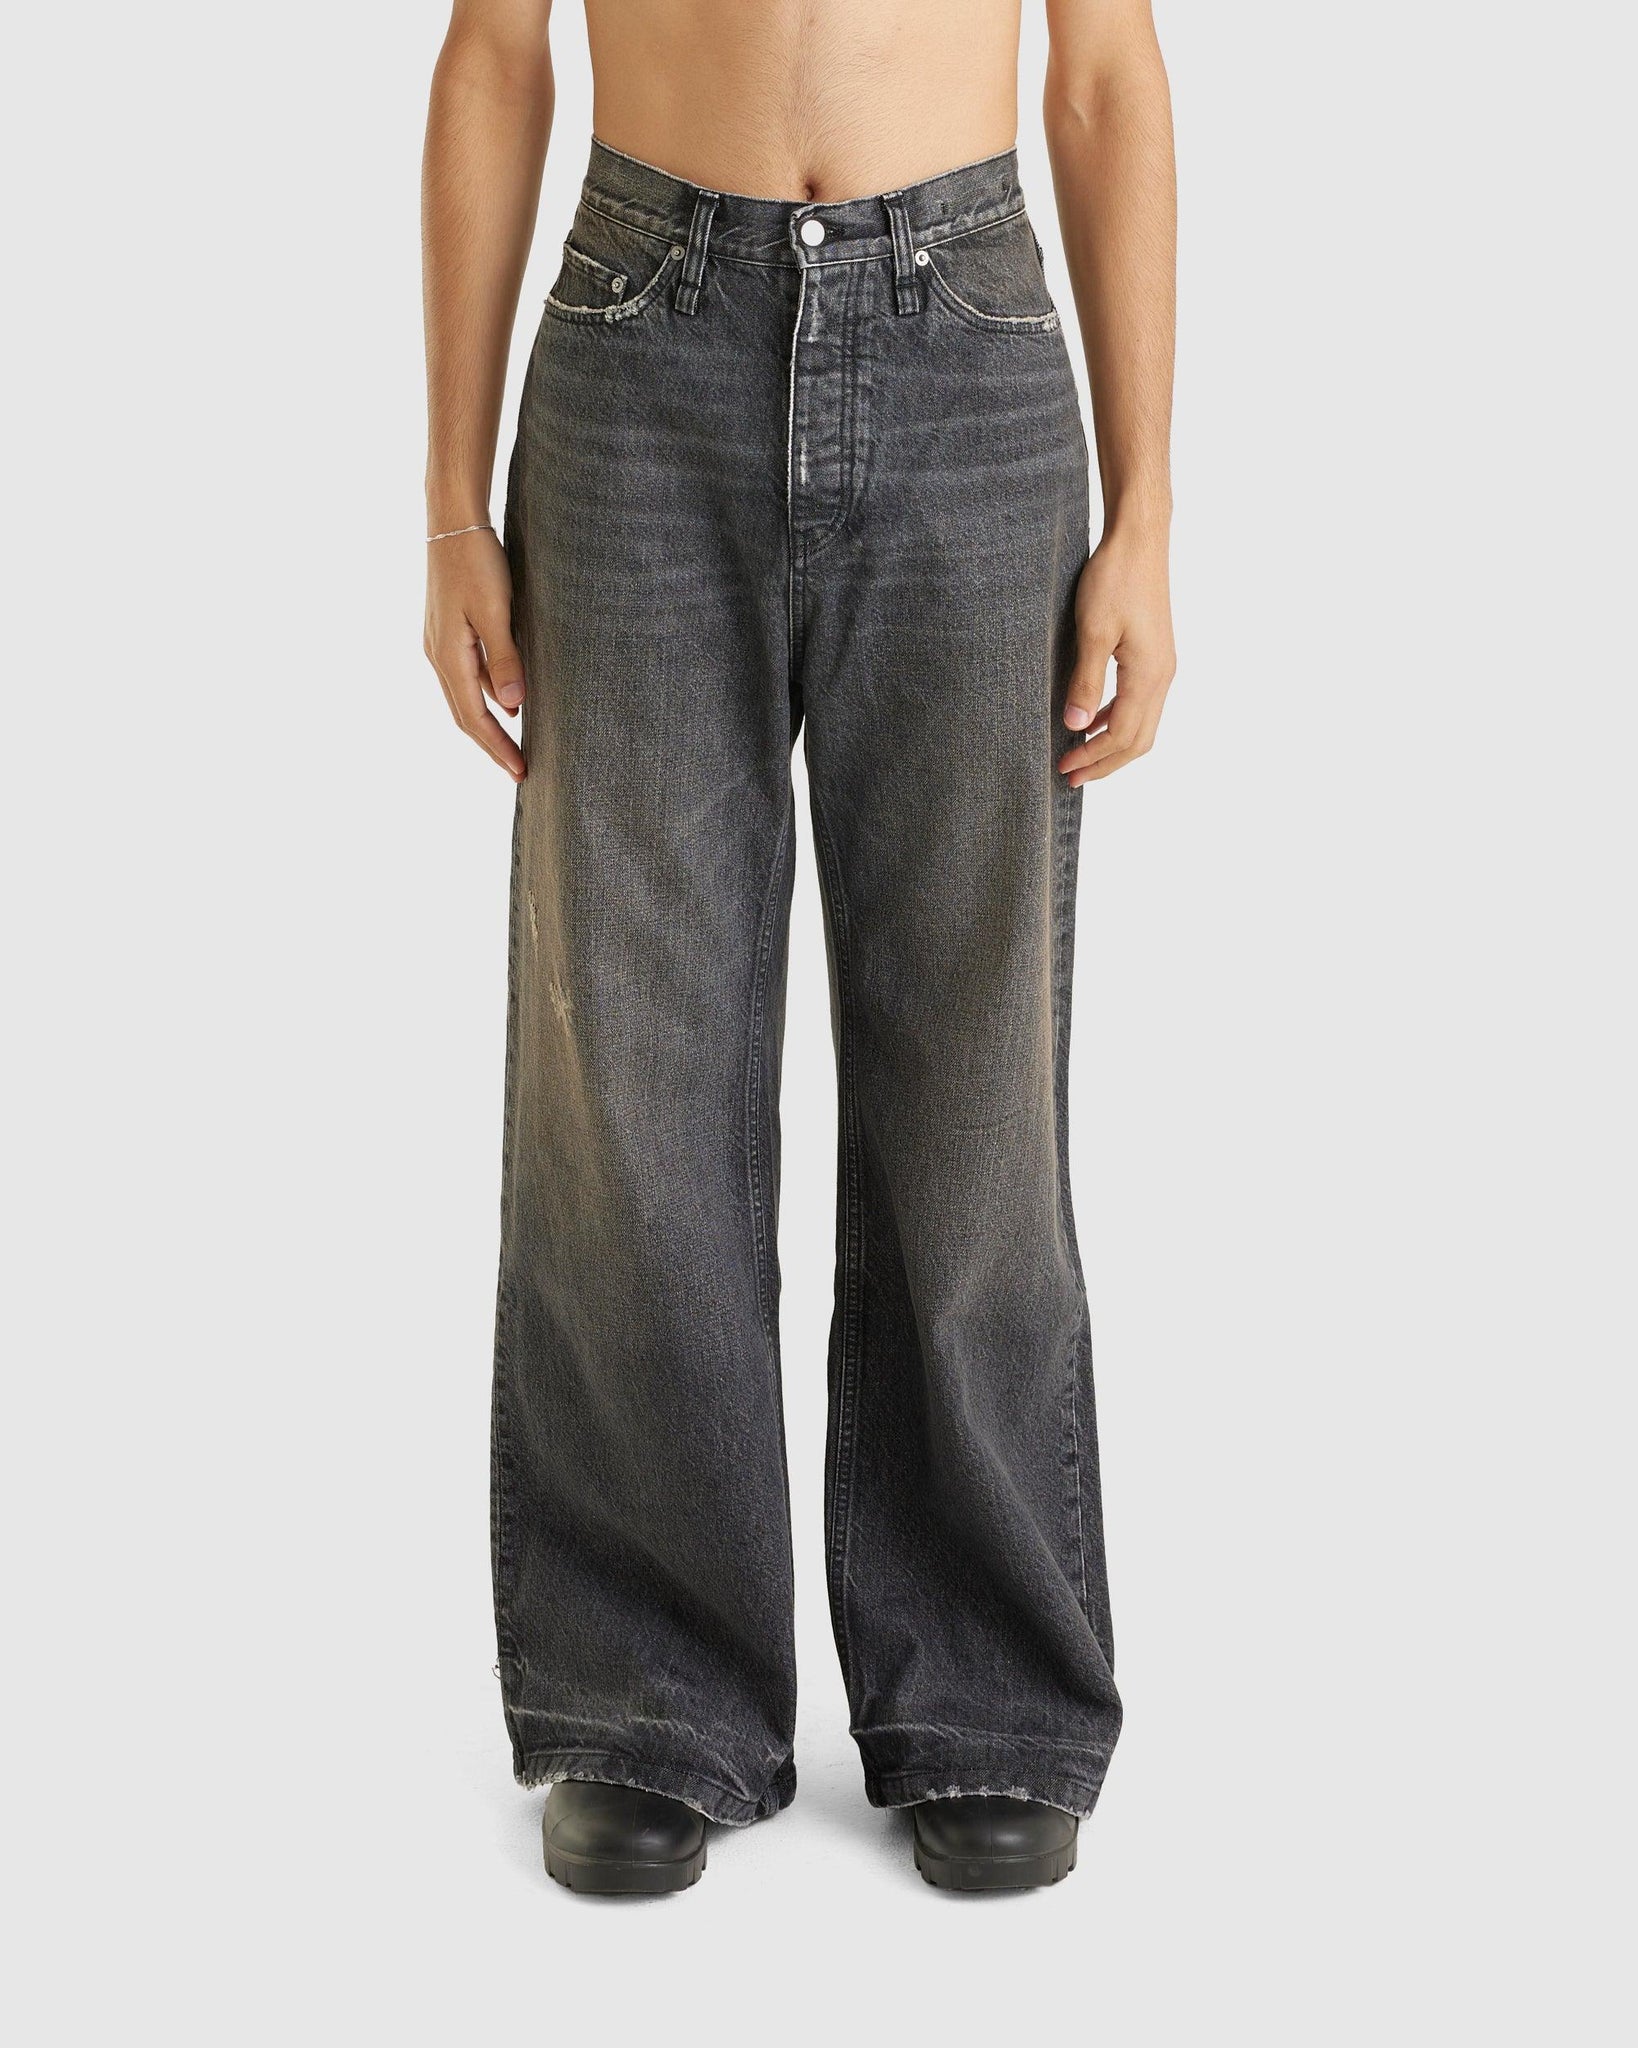 Skid Jeans Heavy Black Vintage - {{ collection.title }} - Chinatown Country Club 